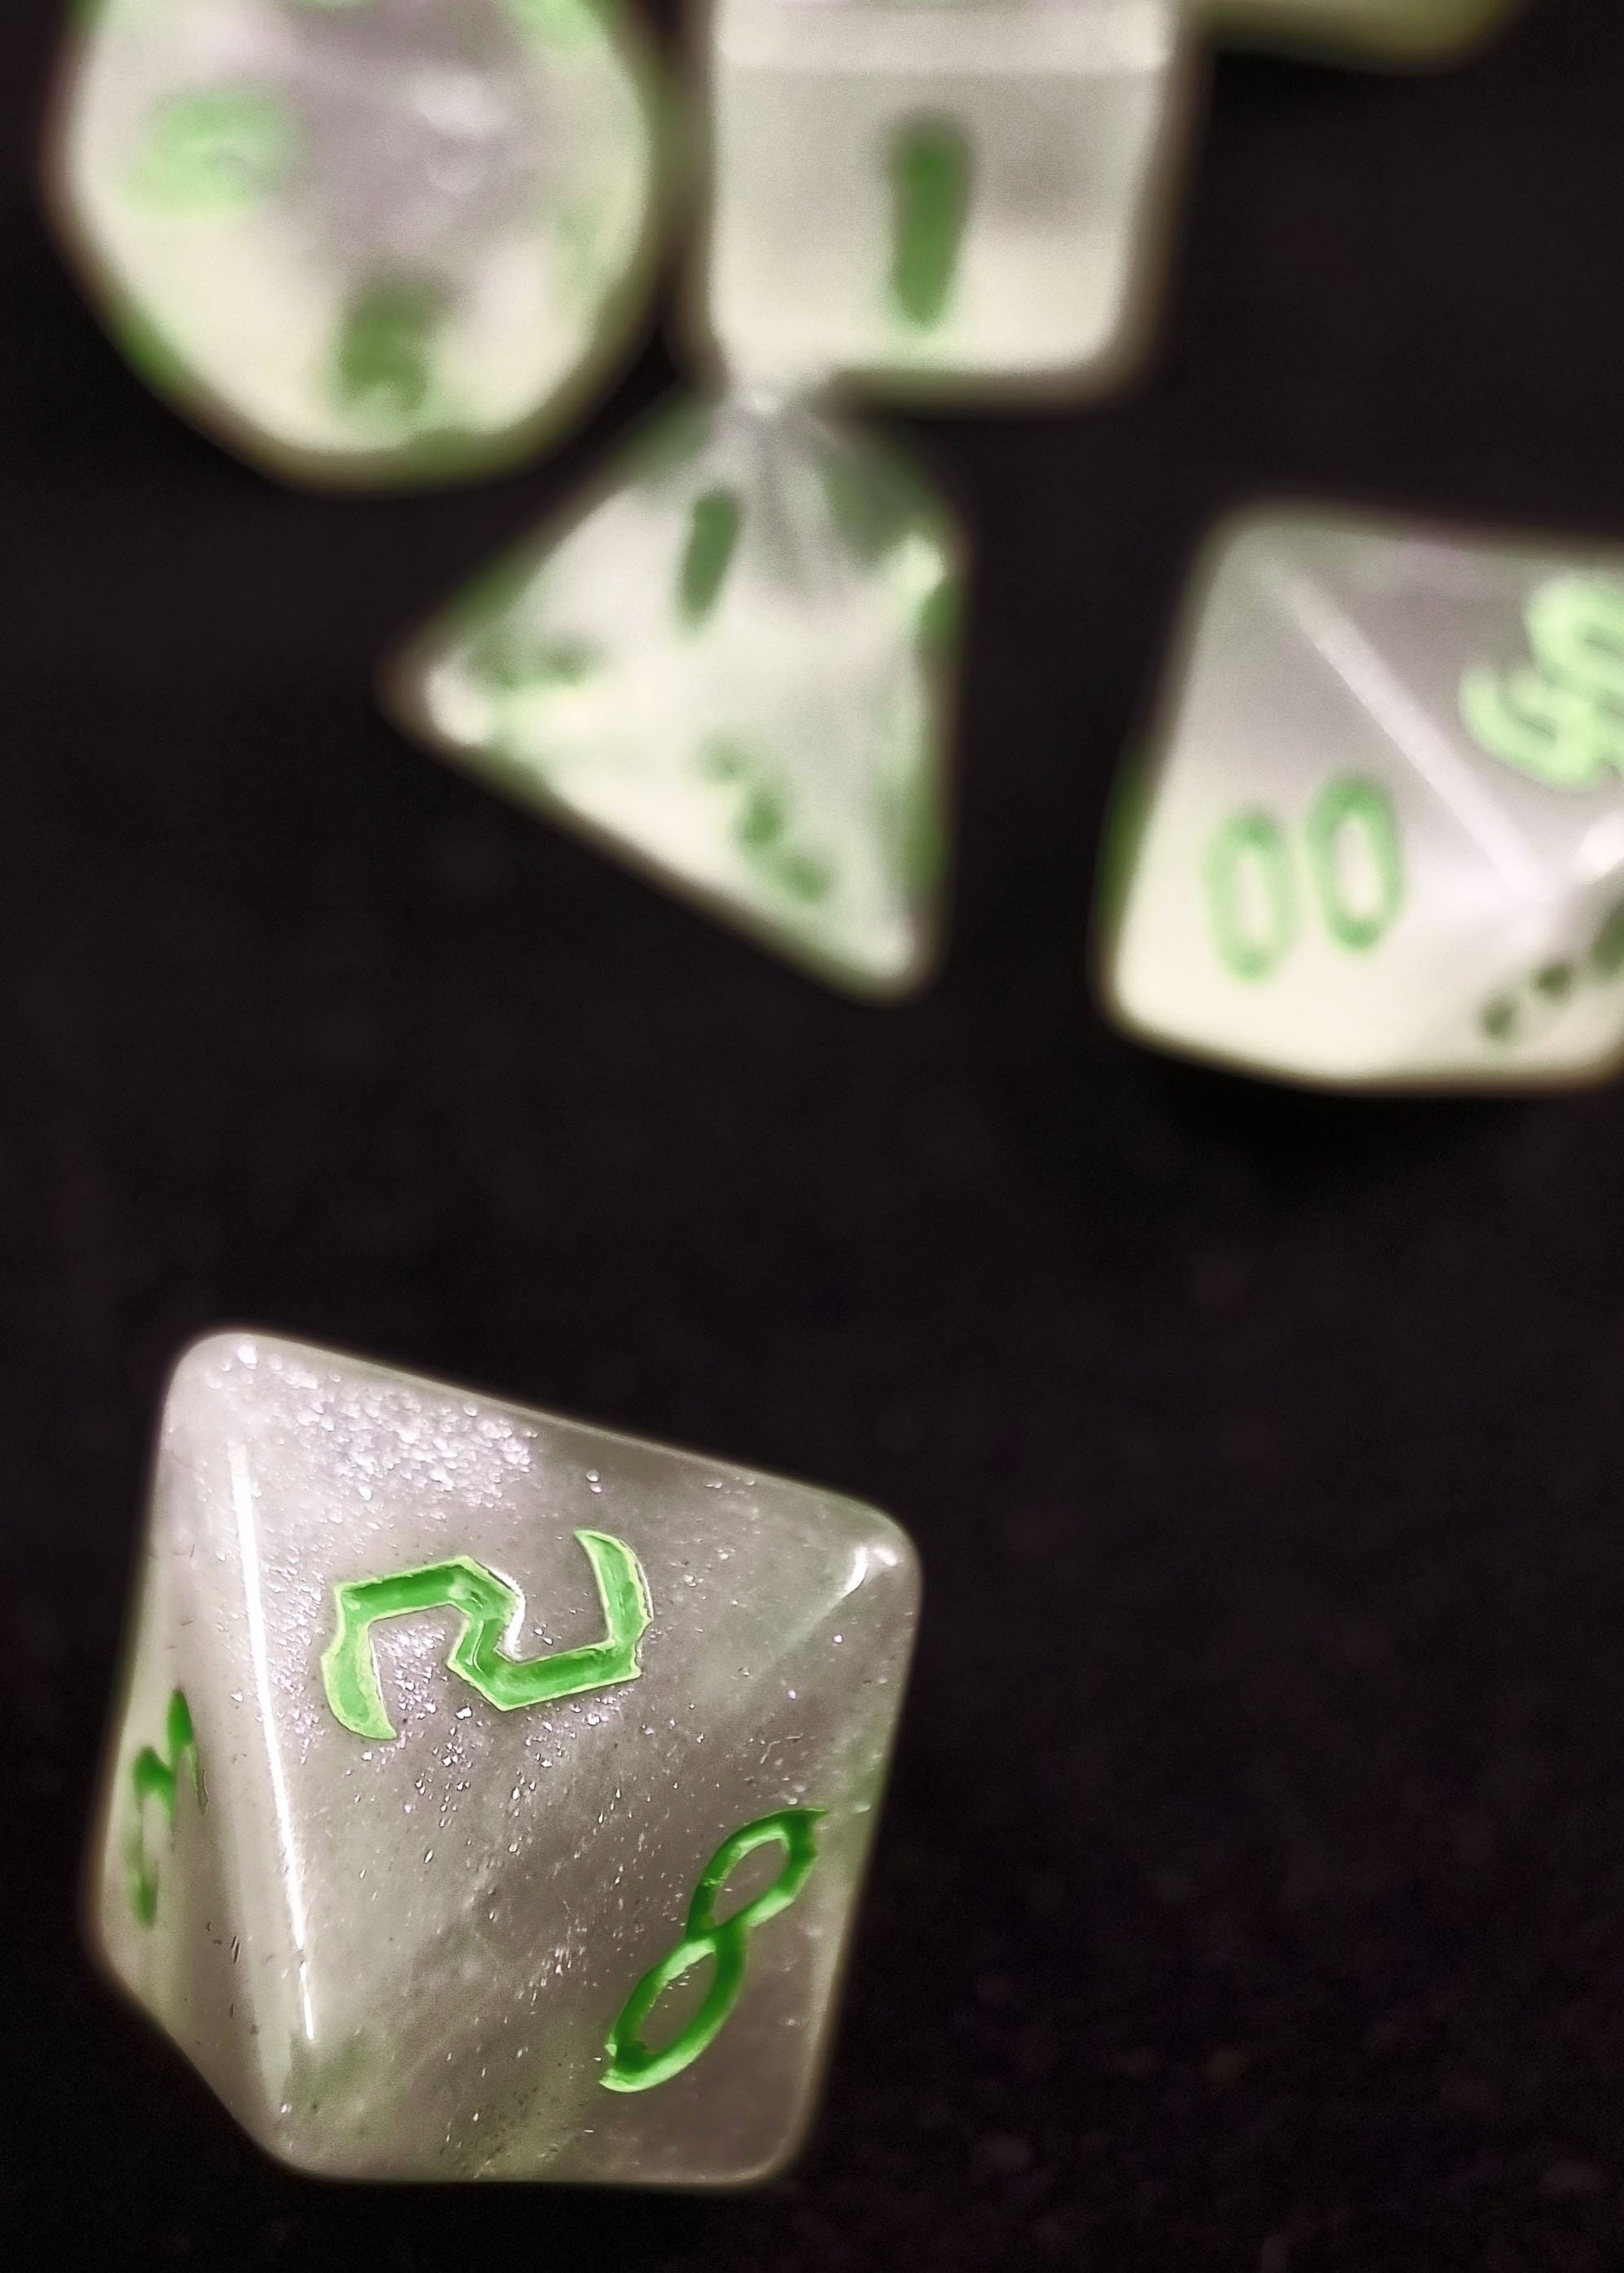 Chaos Green Polyhedral Dice Set - White Semi Translucent Dice with Micro Glitter and Green Numbers